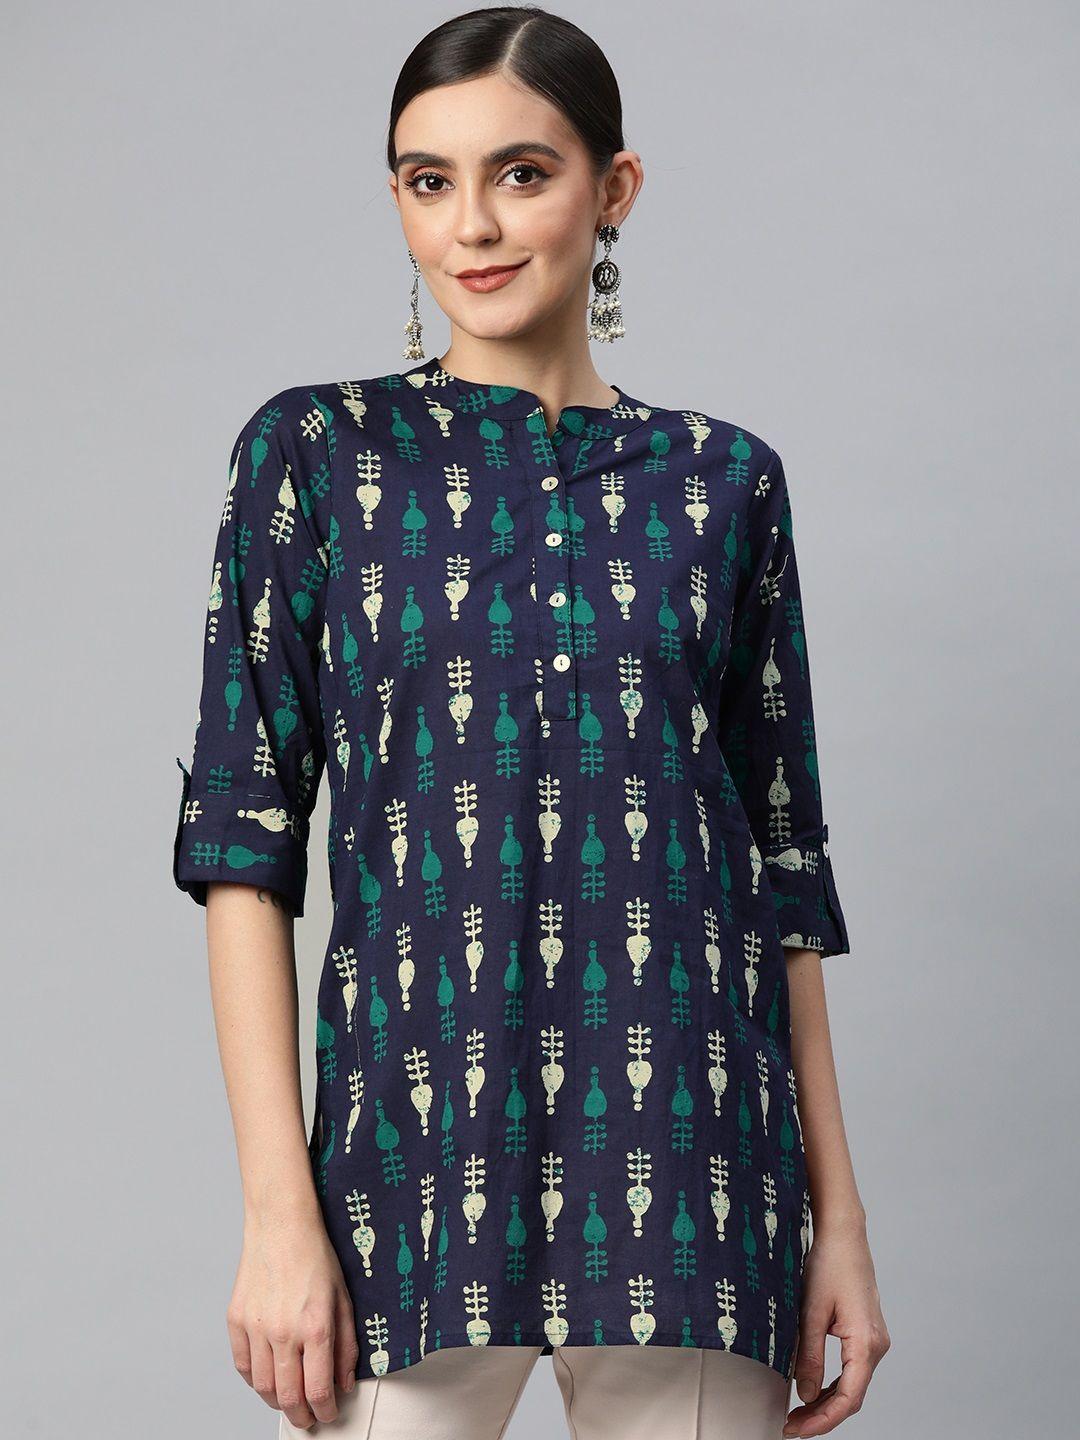 svarchi navy blue & off white pure cotton printed tunic